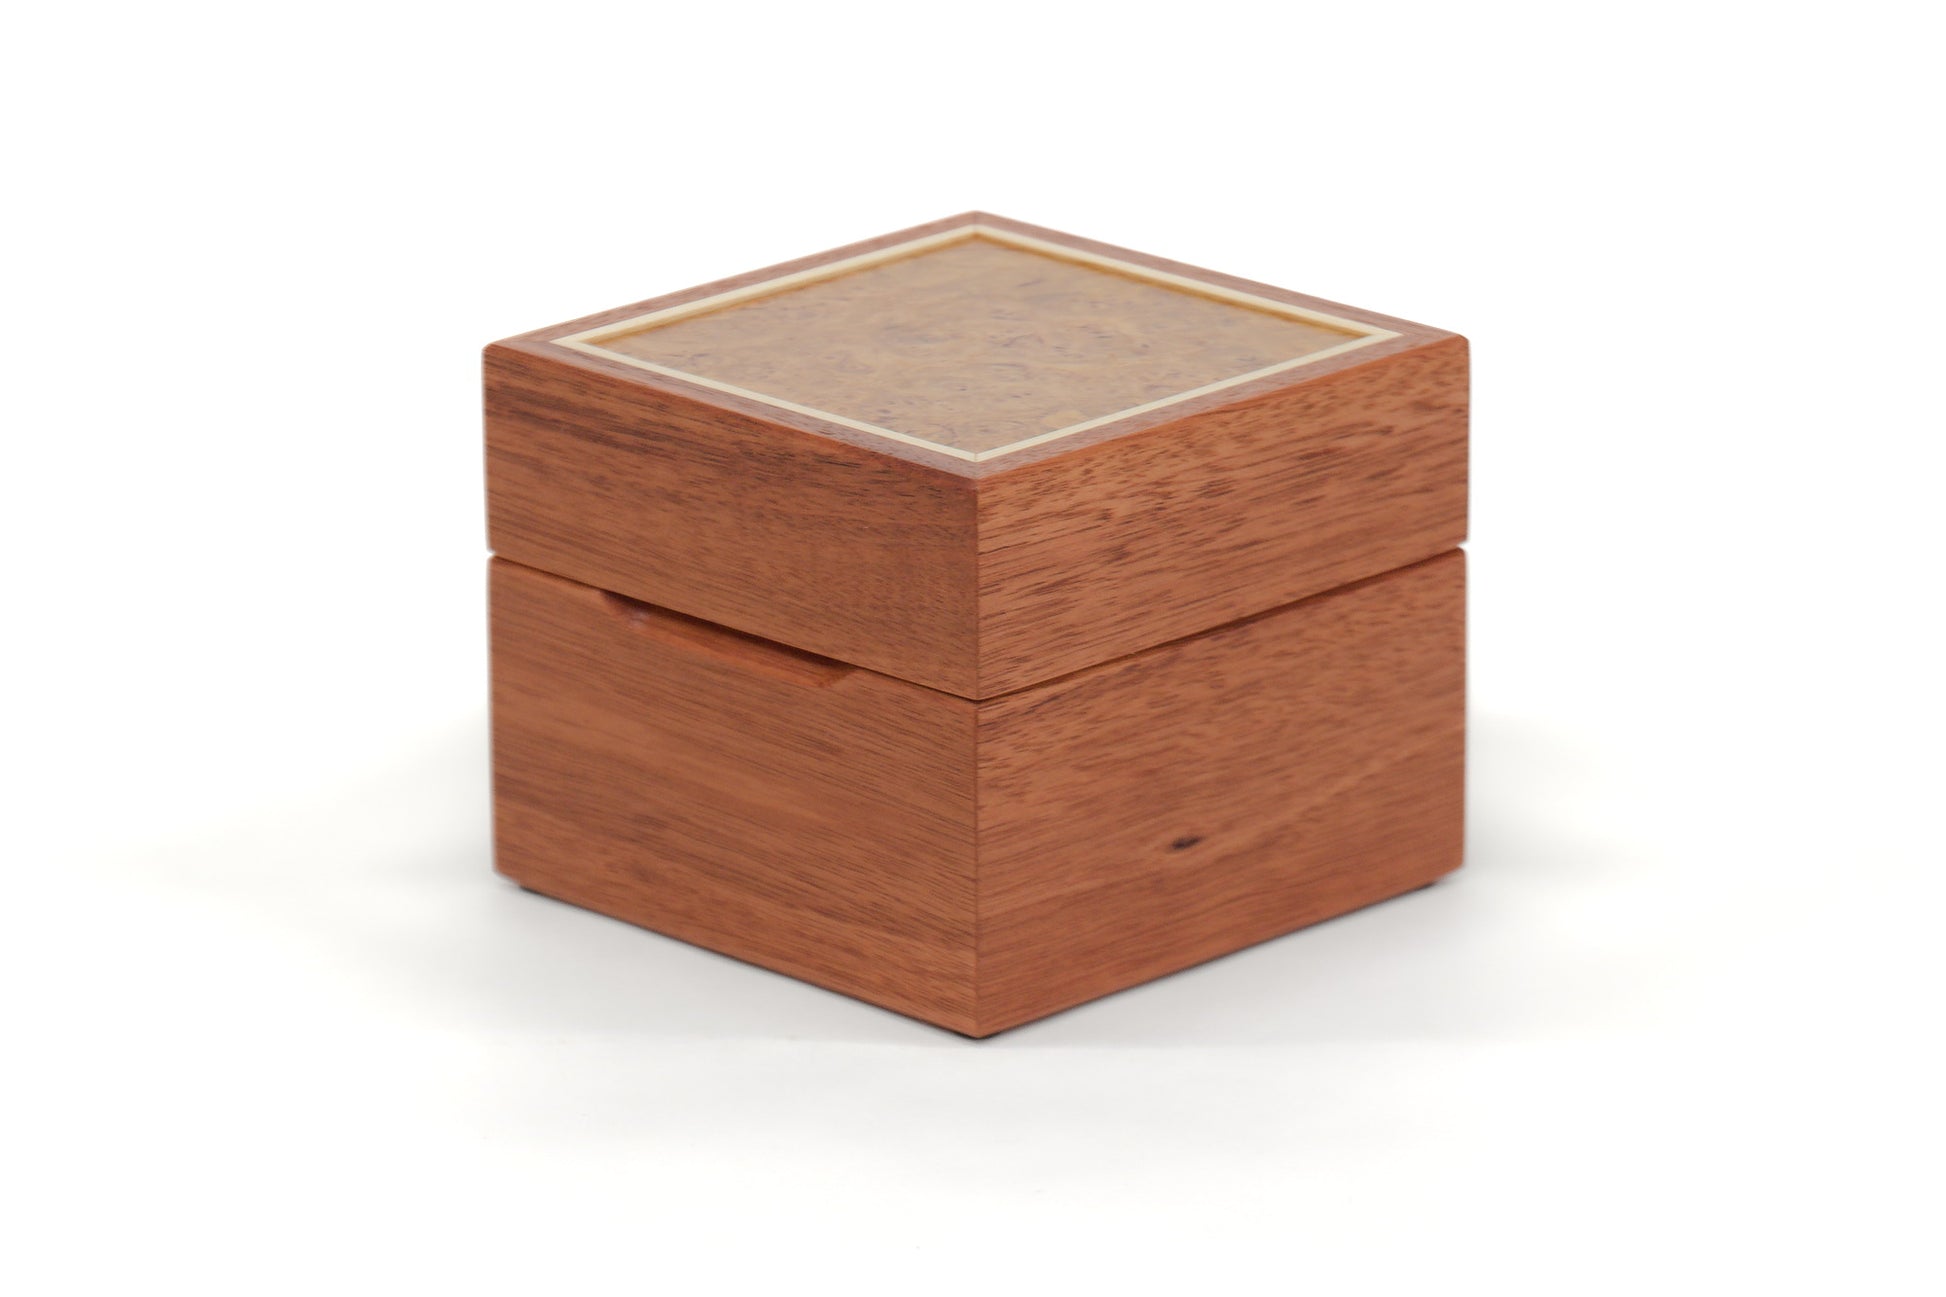 Products Watch Box One - Jarrah and Maple Burl